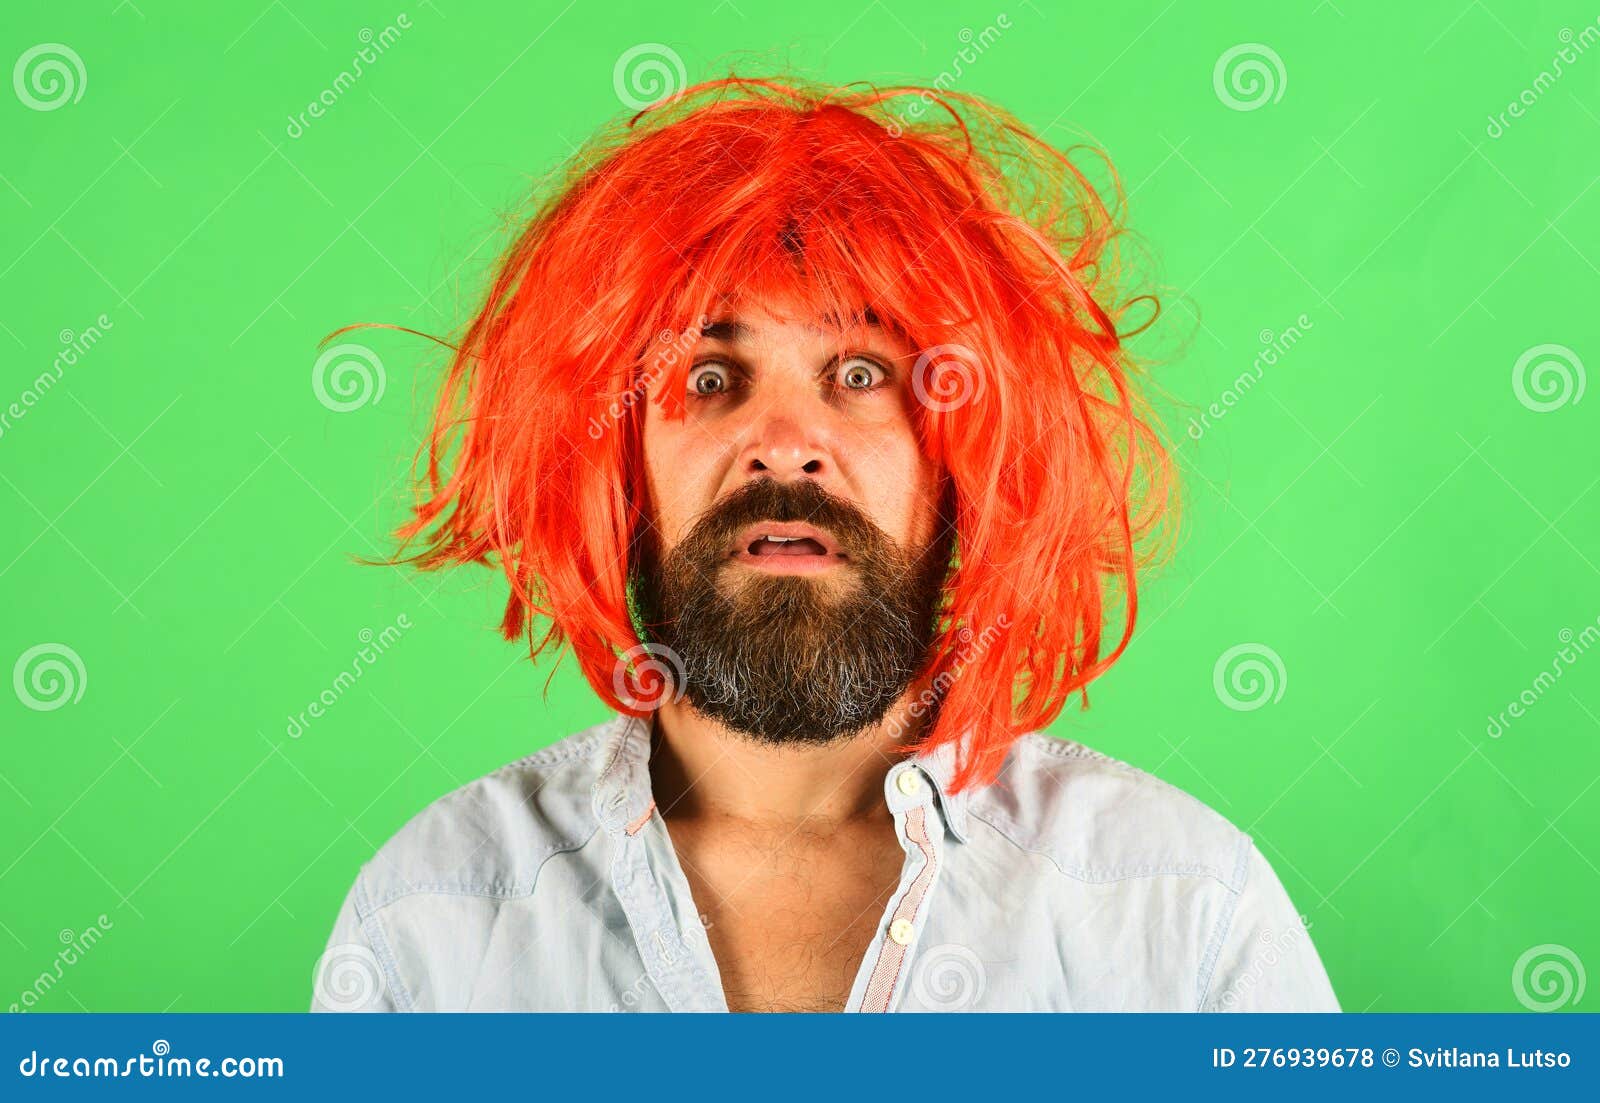 Bearded Man in Red Wig. Surprised Man with Beard and Mustache in Red ...